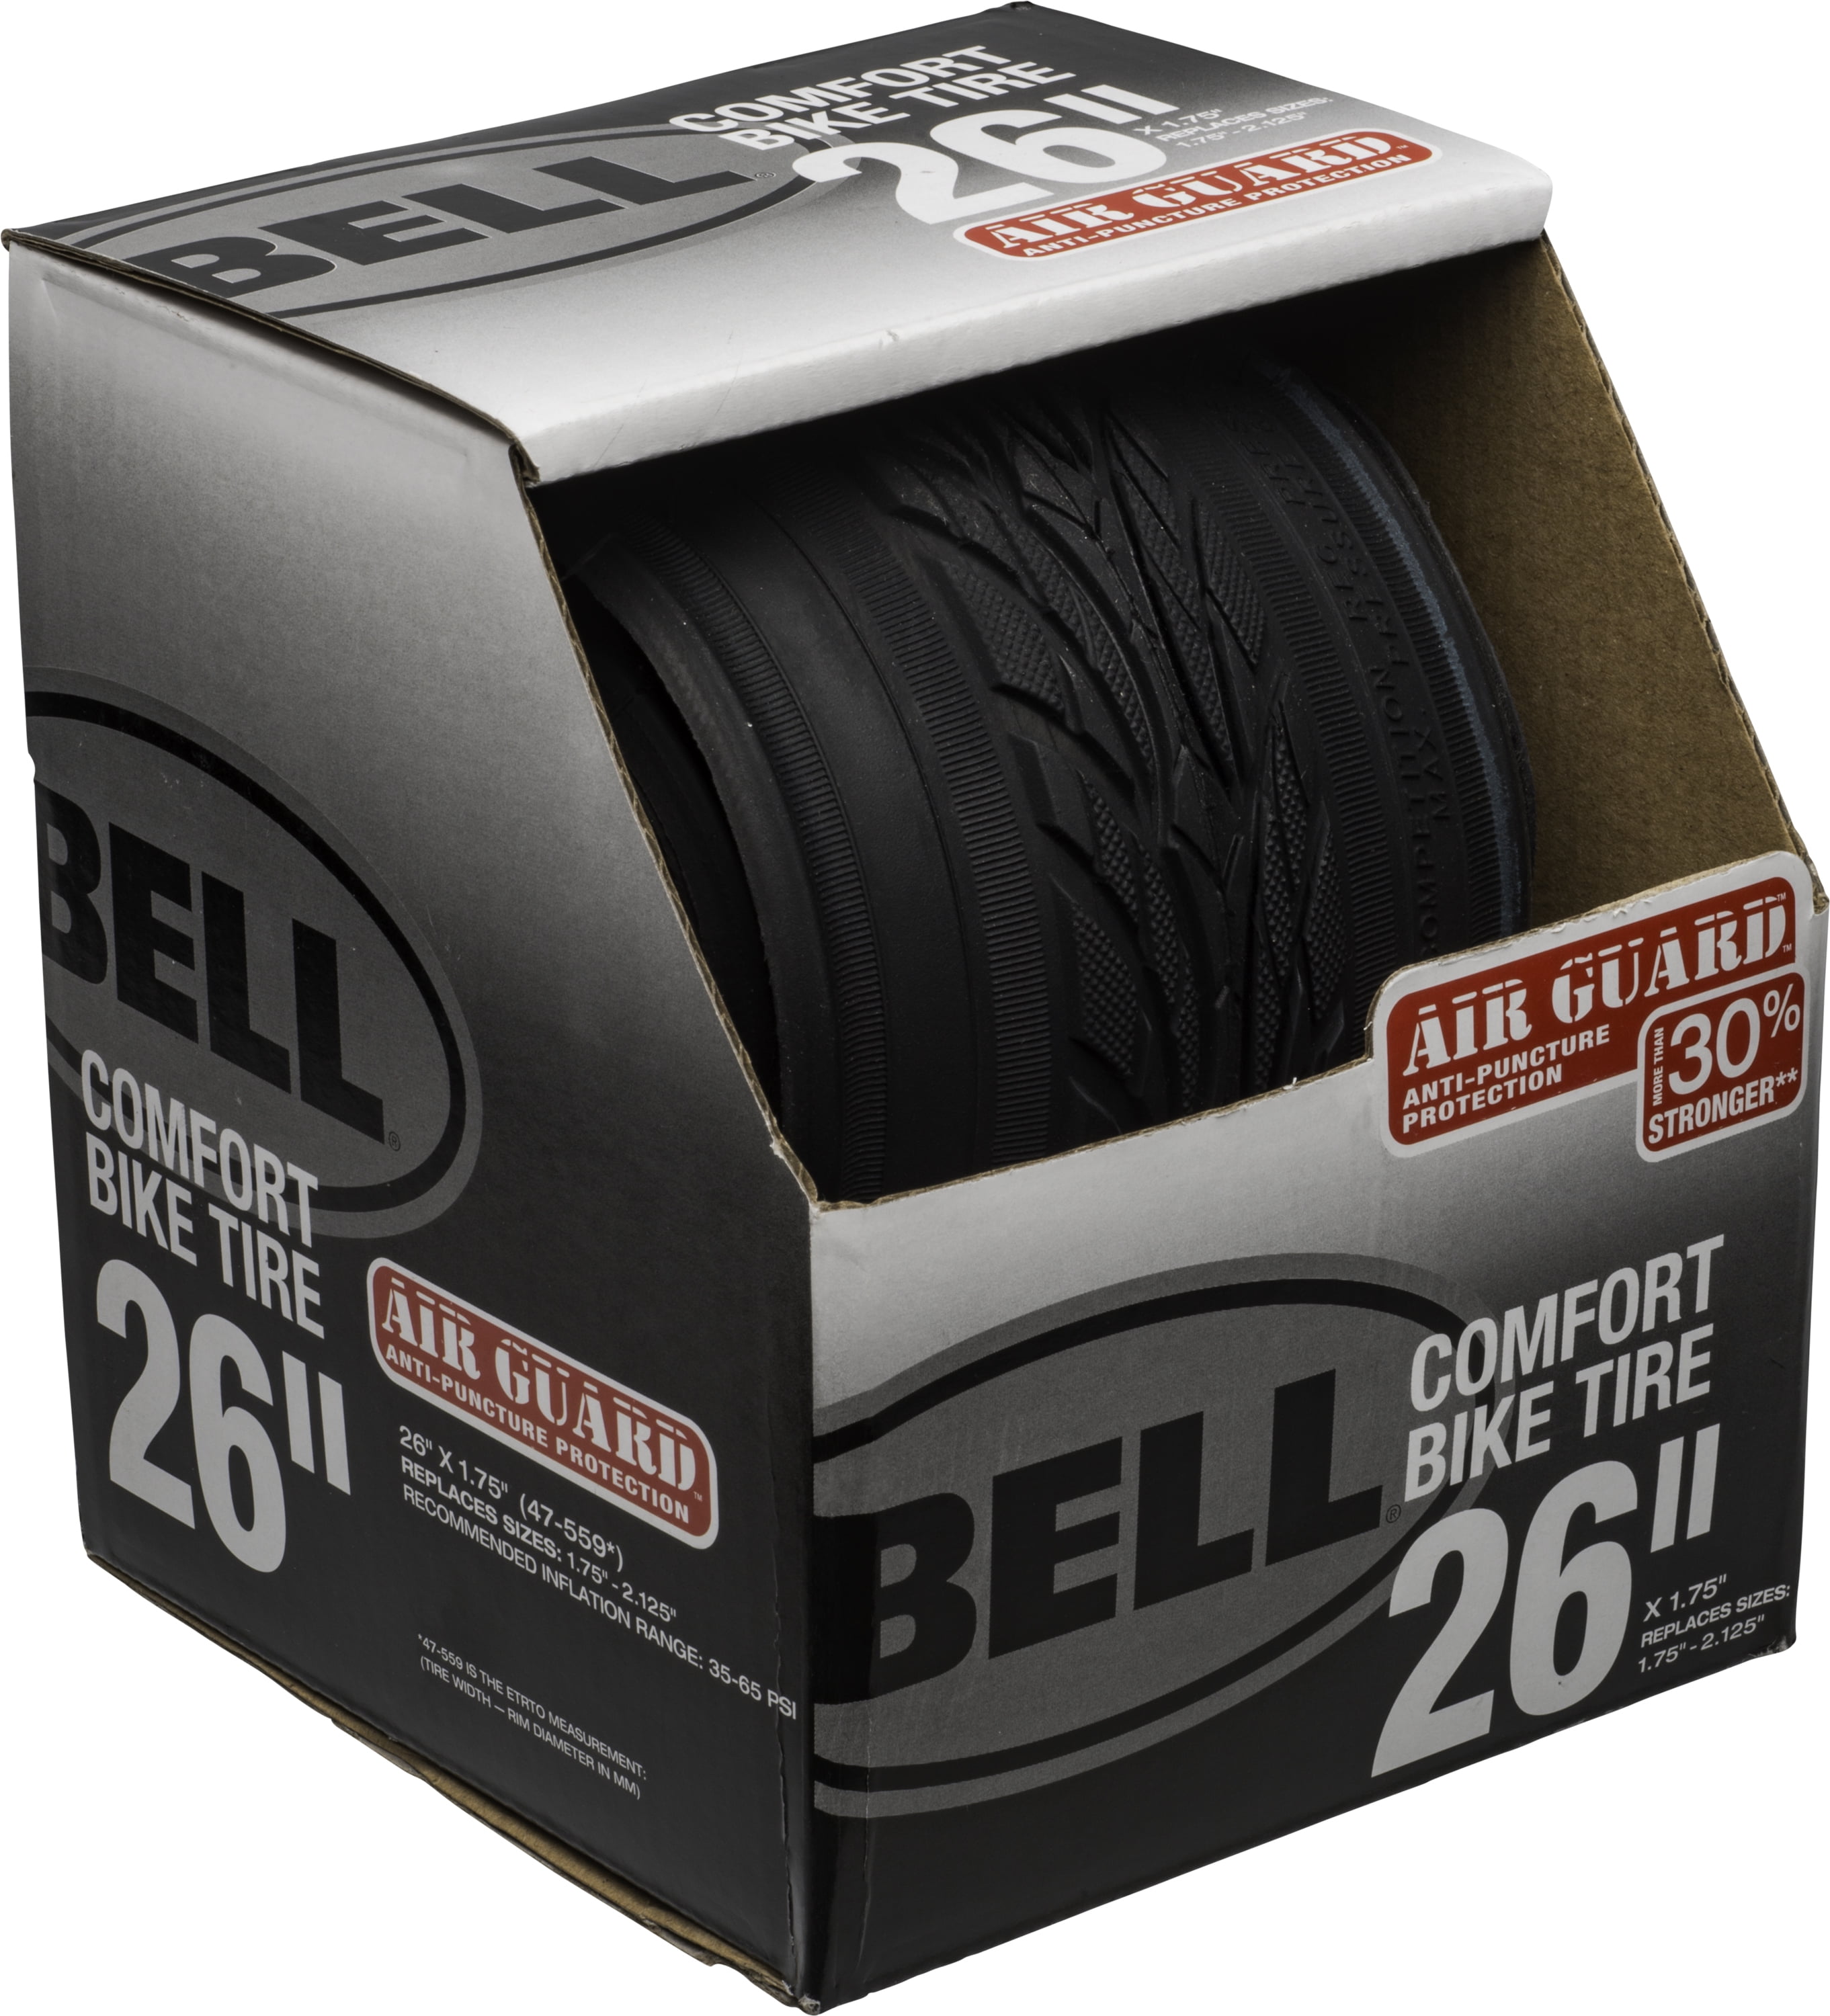 Details about   Lot 700c x 35c ROAD BIKE TIRE Air Guard tires pair BELL replaces 32mm-45mm 2 